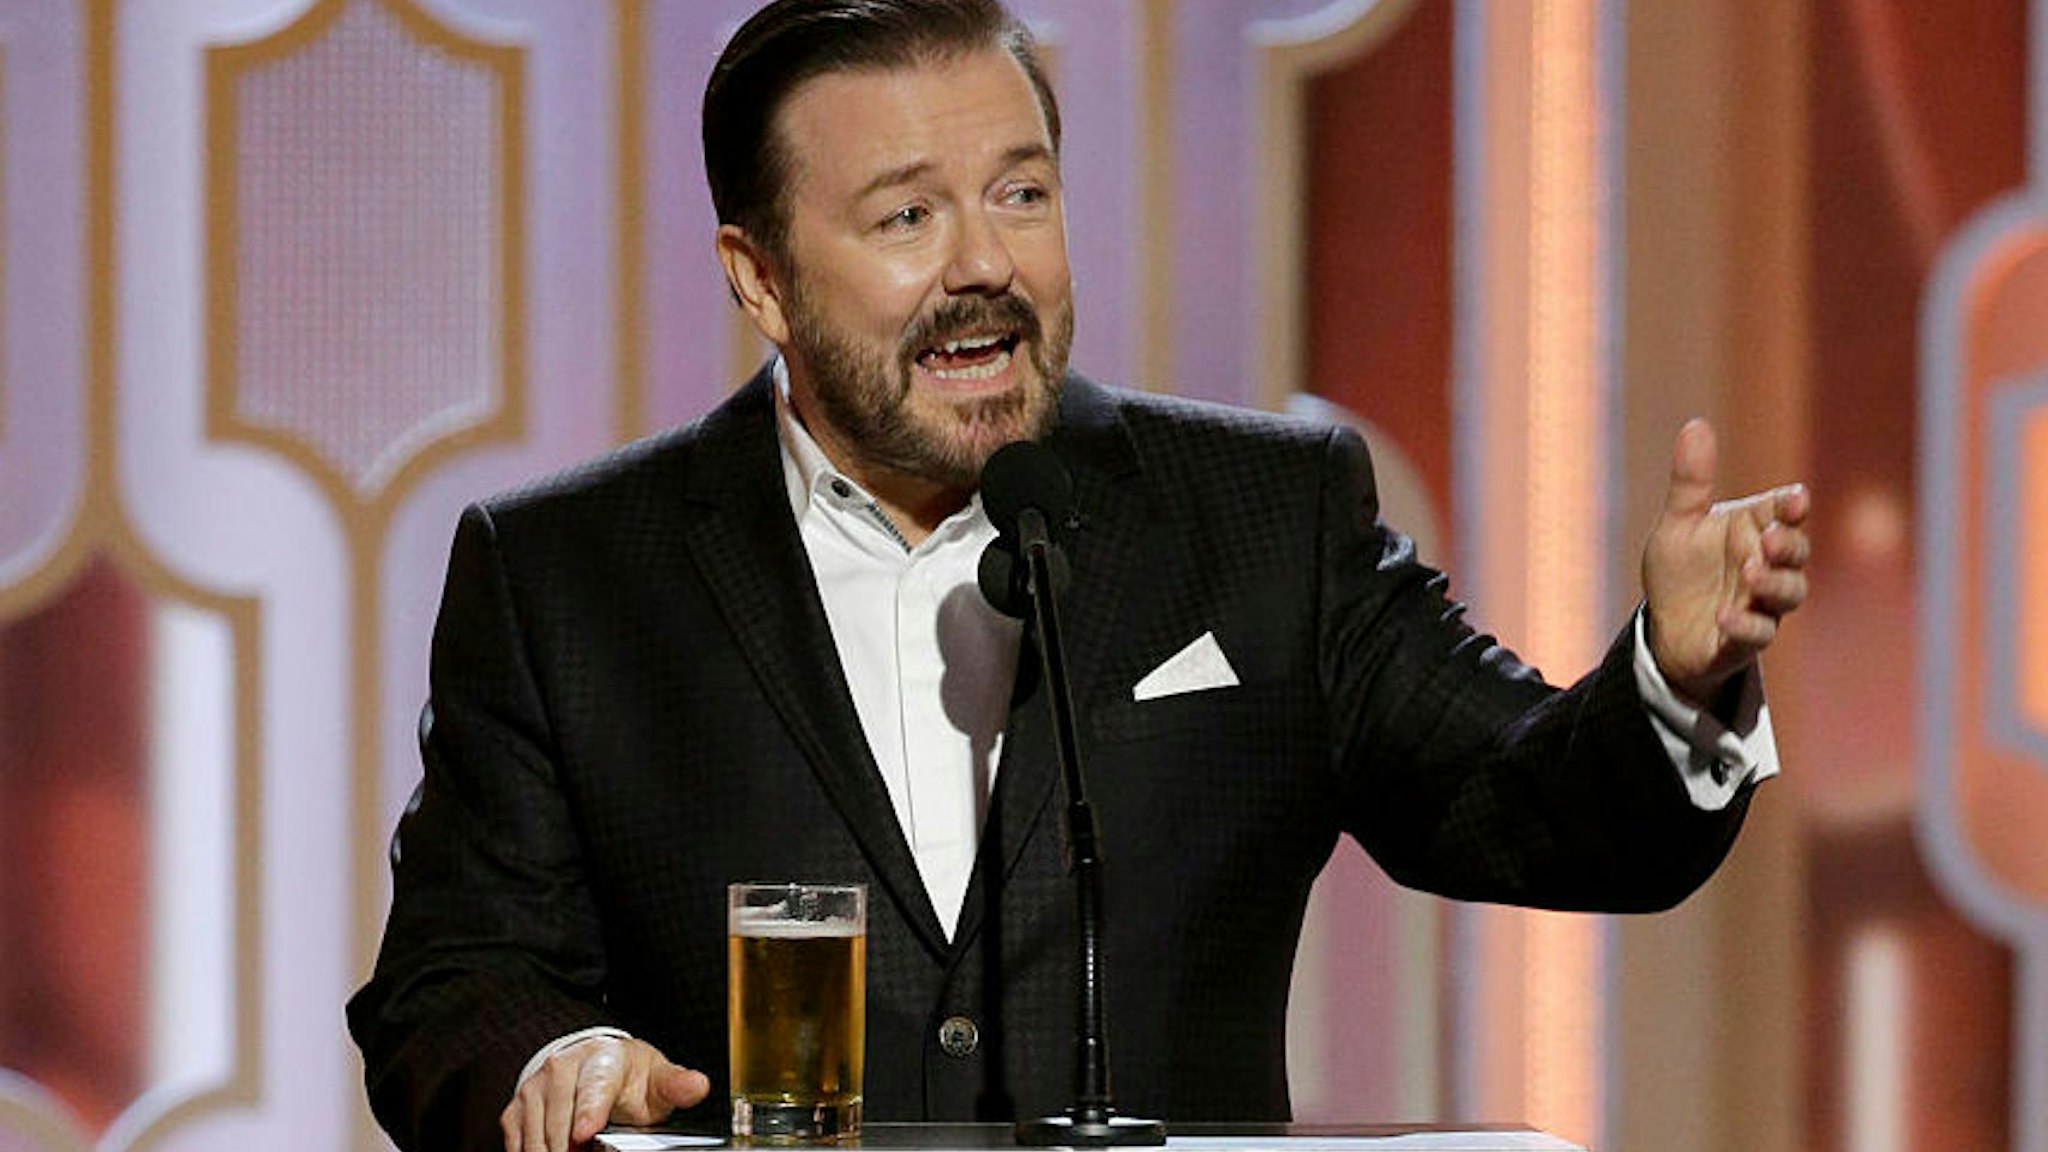 73rd ANNUAL GOLDEN GLOBE AWARDS -- Pictured: Ricky Gervais, Host at the 73rd Annual Golden Globe Awards held at the Beverly Hilton Hotel on January 10, 2016 --